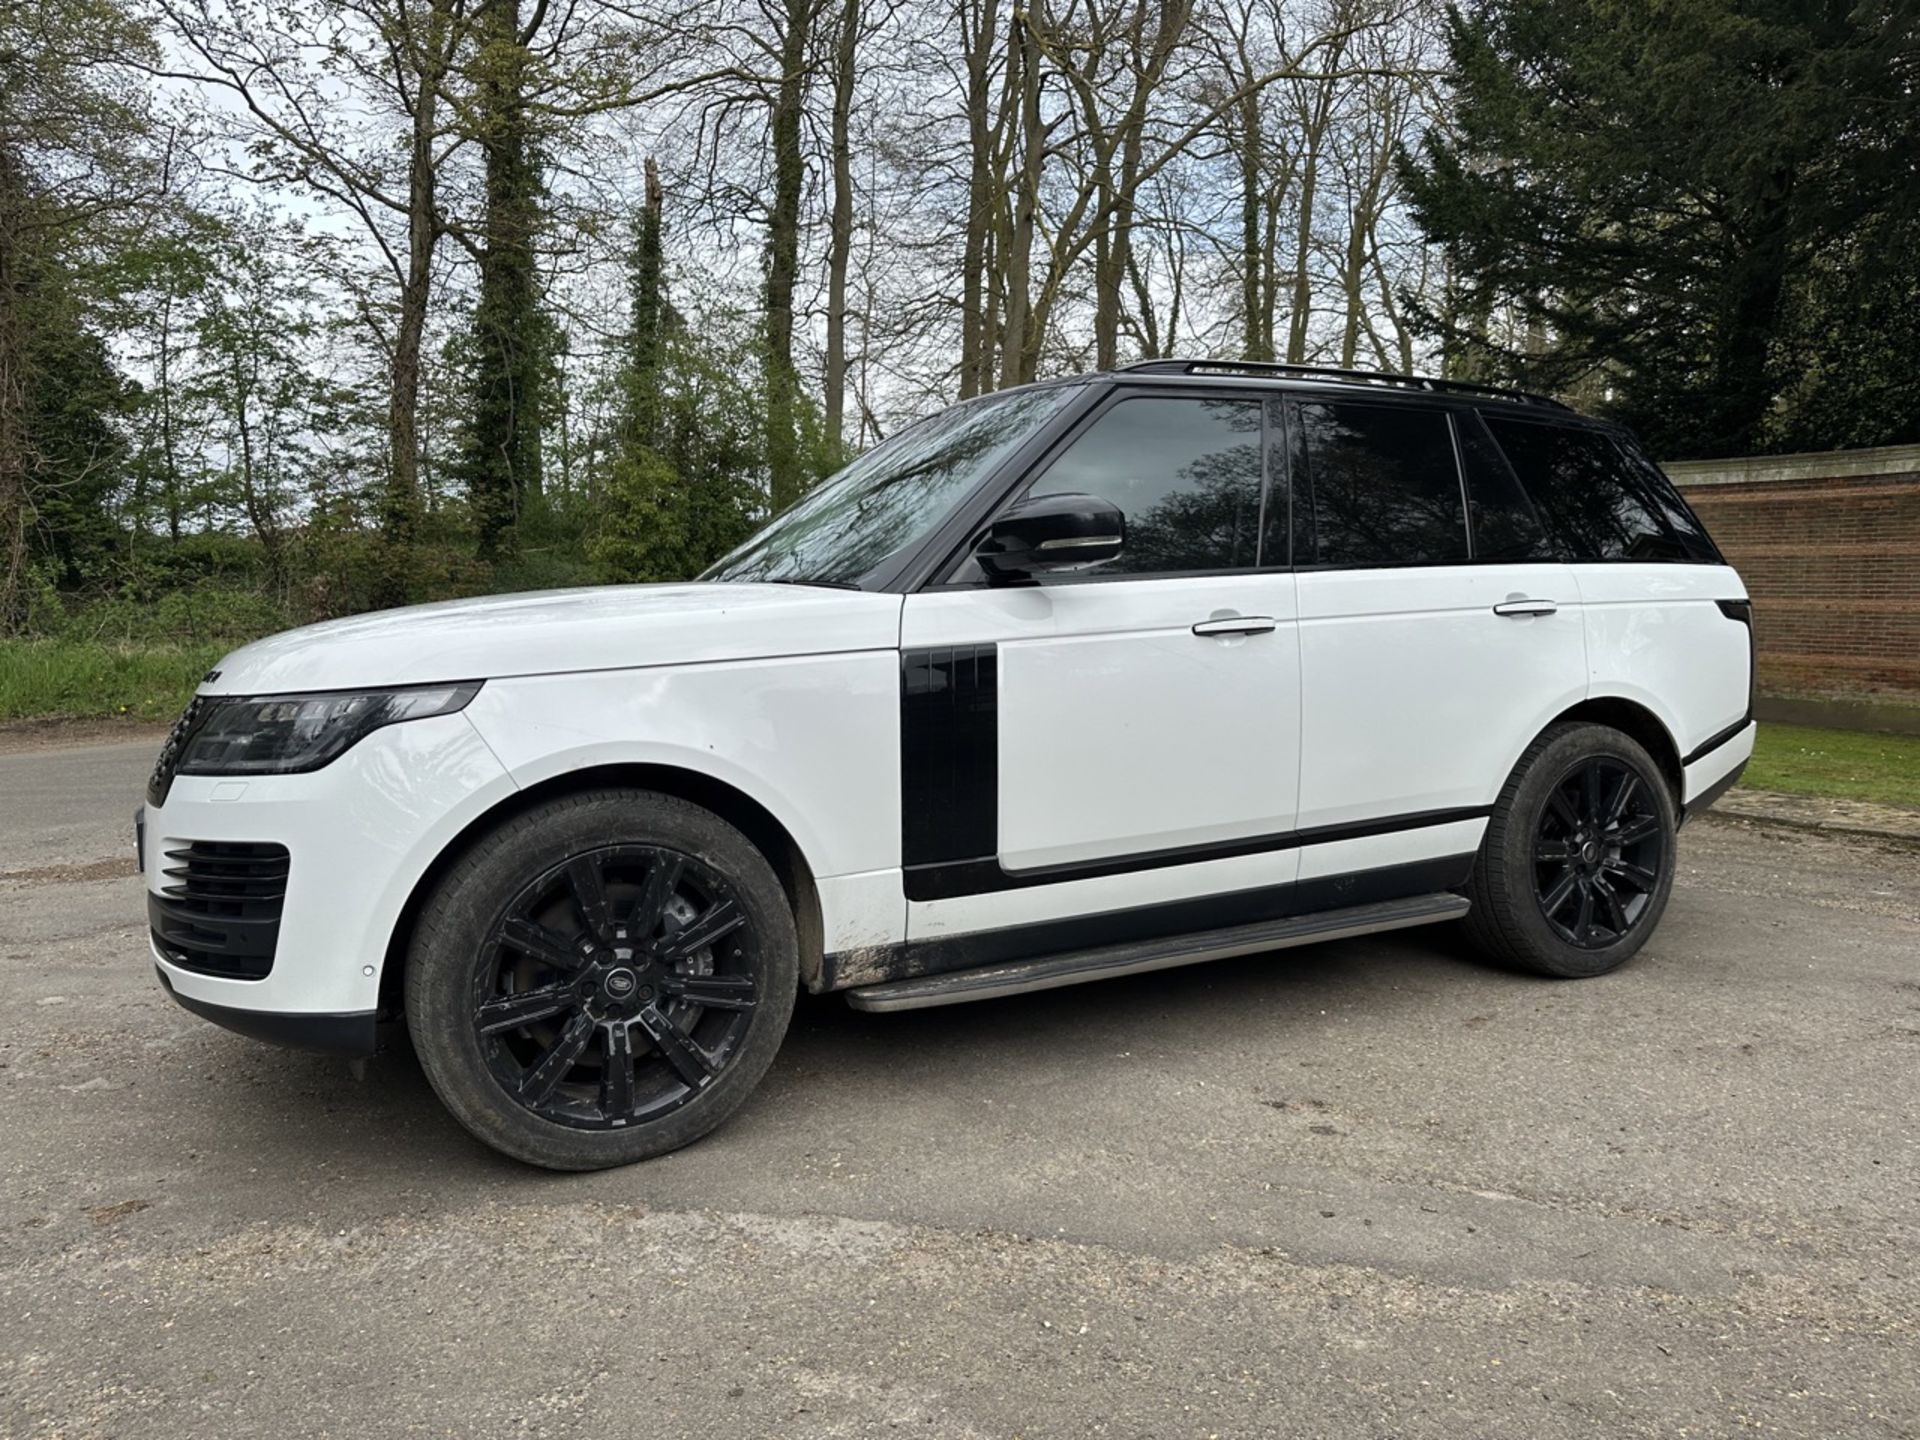 LAND ROVER RANGE ROVER 2.0 P400e Autobiography 4dr Auto - Automatic - 2018 - 31k miles - FULL SH - Image 5 of 17